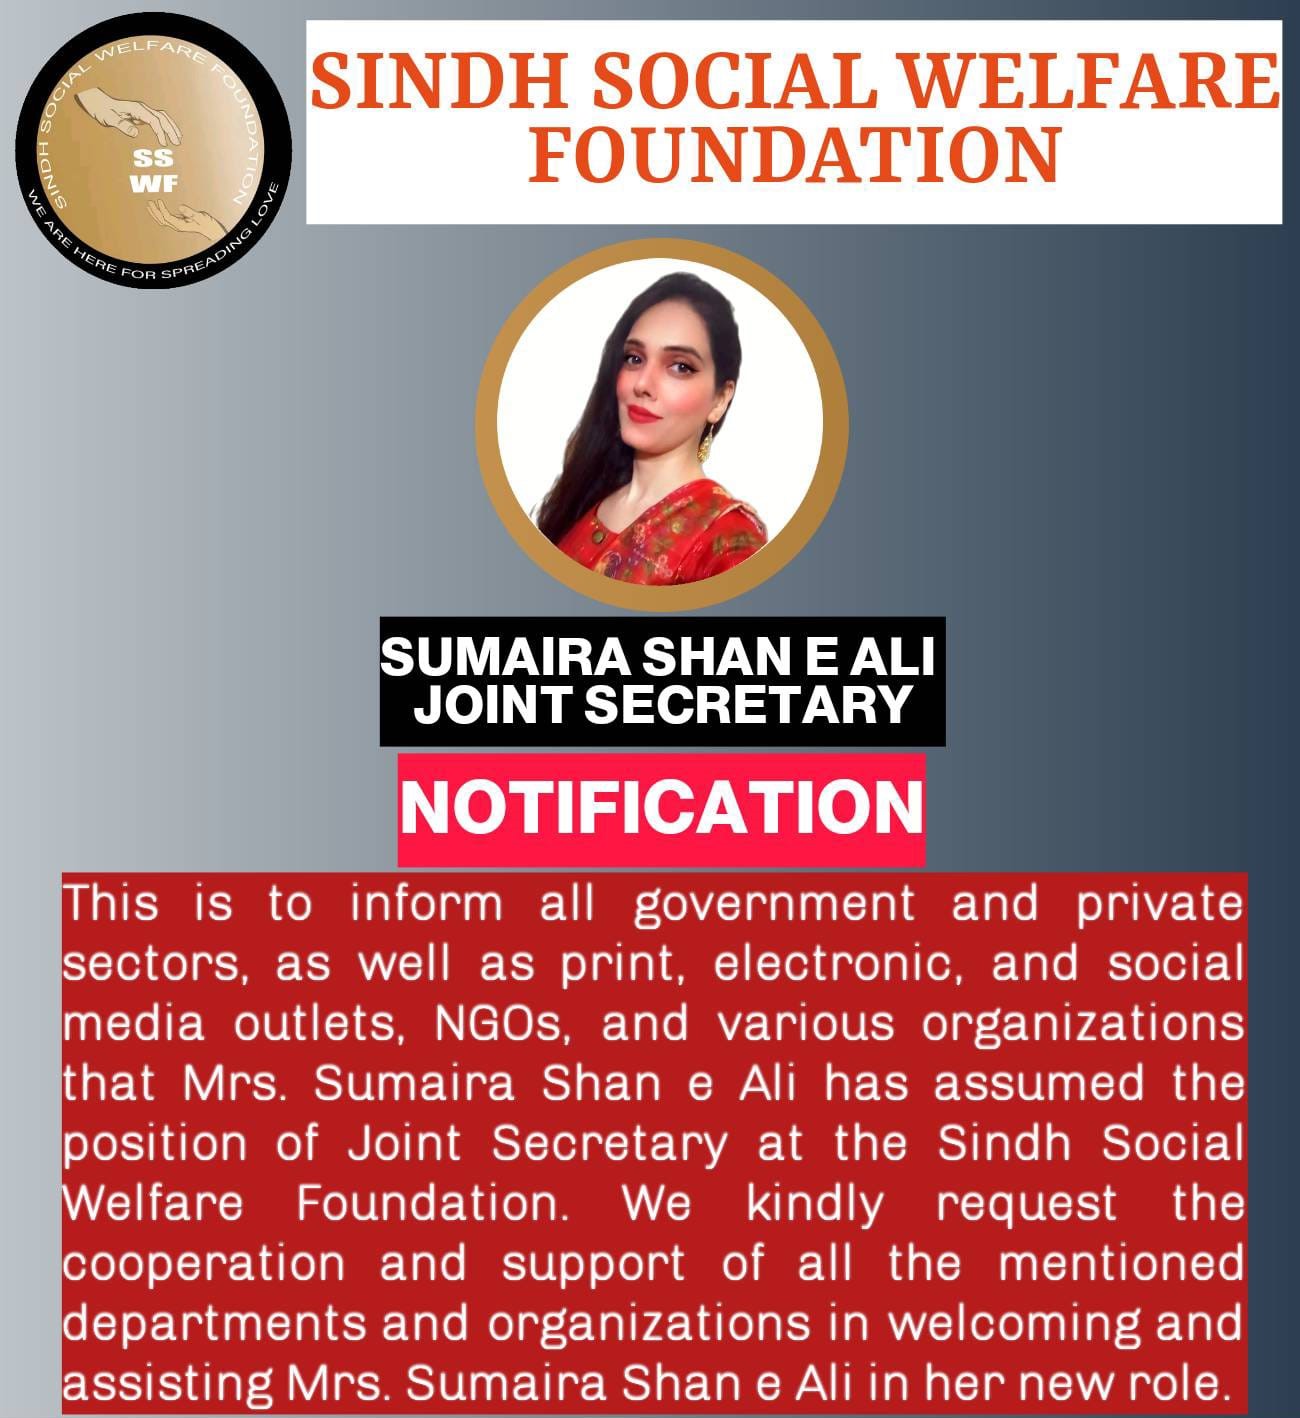 Appointment of Mrs. Sumaira Shan e Ali as Joint Secretary at the Sindh Social Welfare Foundation